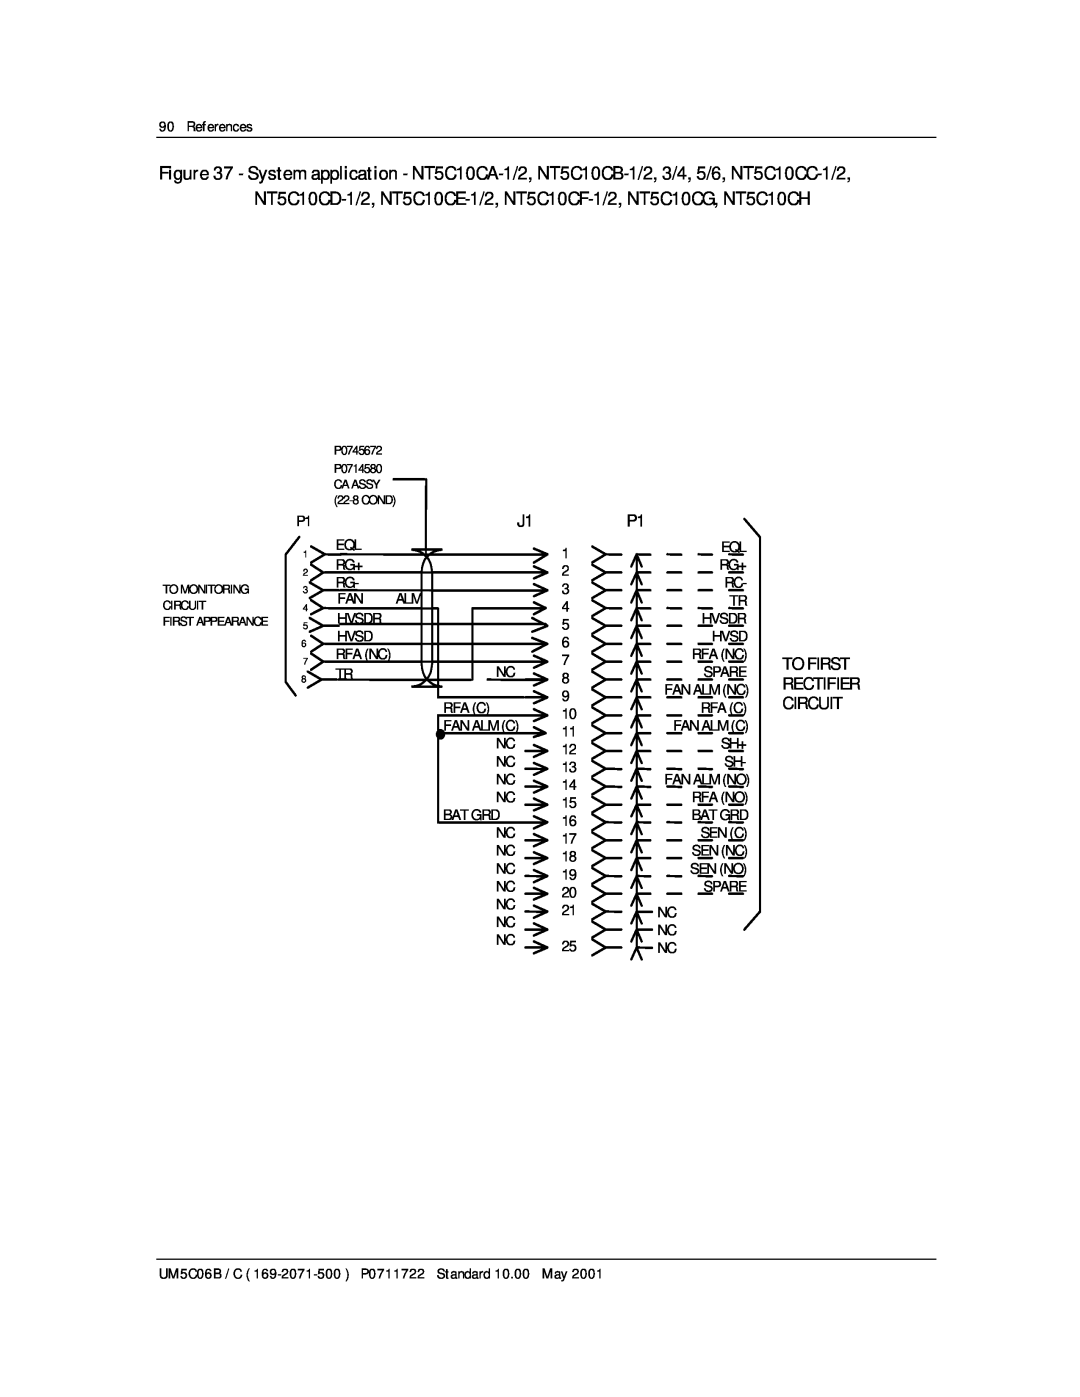 Emerson MPR15 Series References, To First, Circuit, UM5C06B / C 169-2071-500 P0711722 Standard 10.00 May, P0745672, Cond 